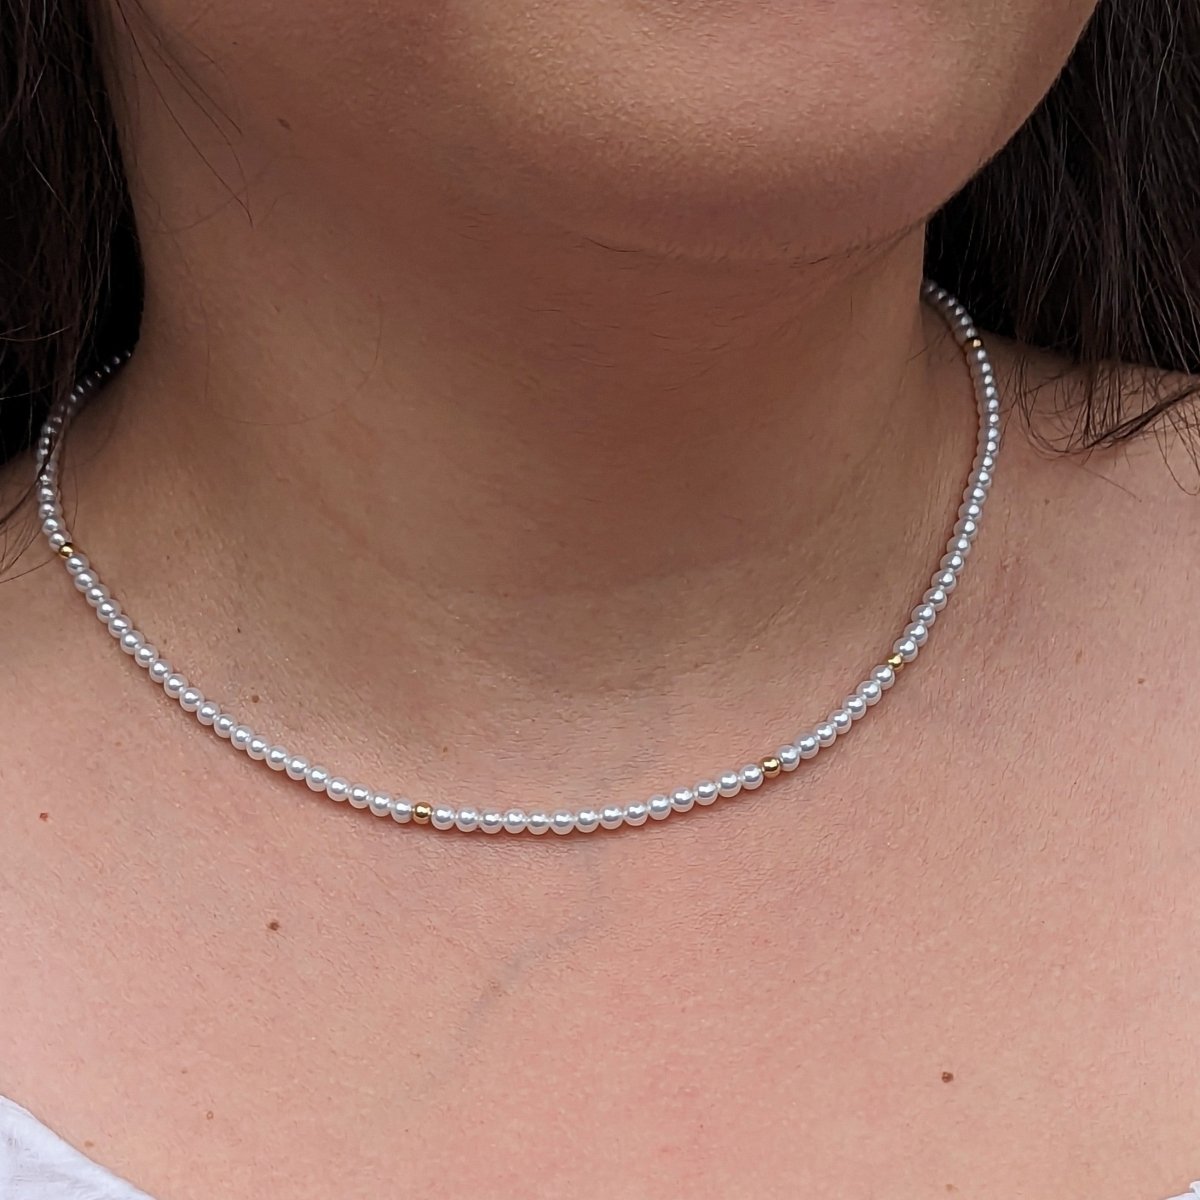 3.3-3.5mm White Seed Bead Nucleated Freshwater Pearl Necklace w/Gold Beads - Marina Korneev Fine Pearls